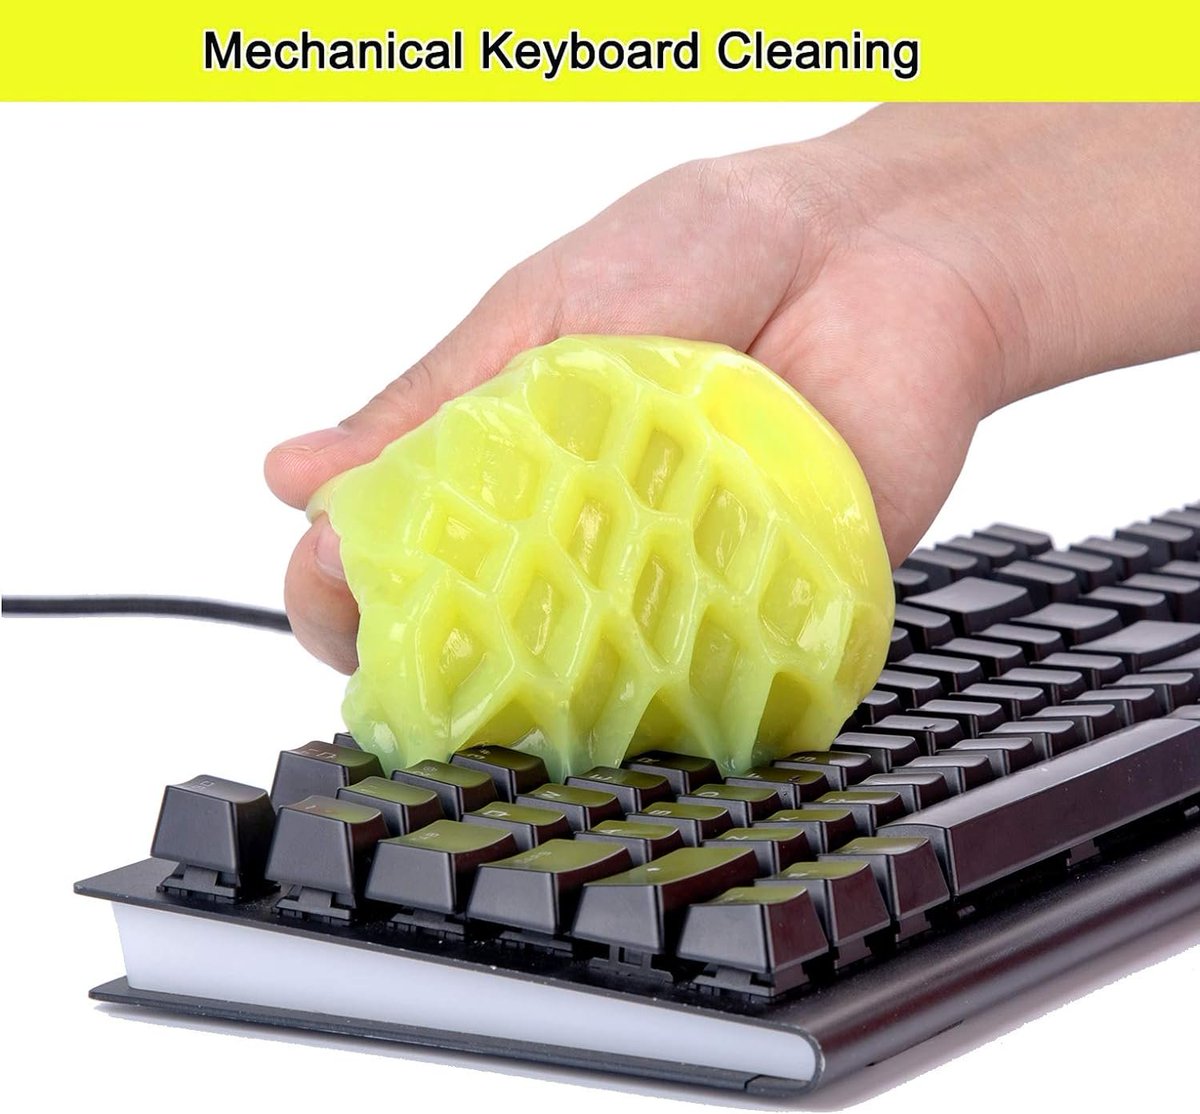 COLORCORAL Cleaning Gel is now 50% OFF

amazon.com/Keyboard-Unive…

#desk #desktop #cleaninggel